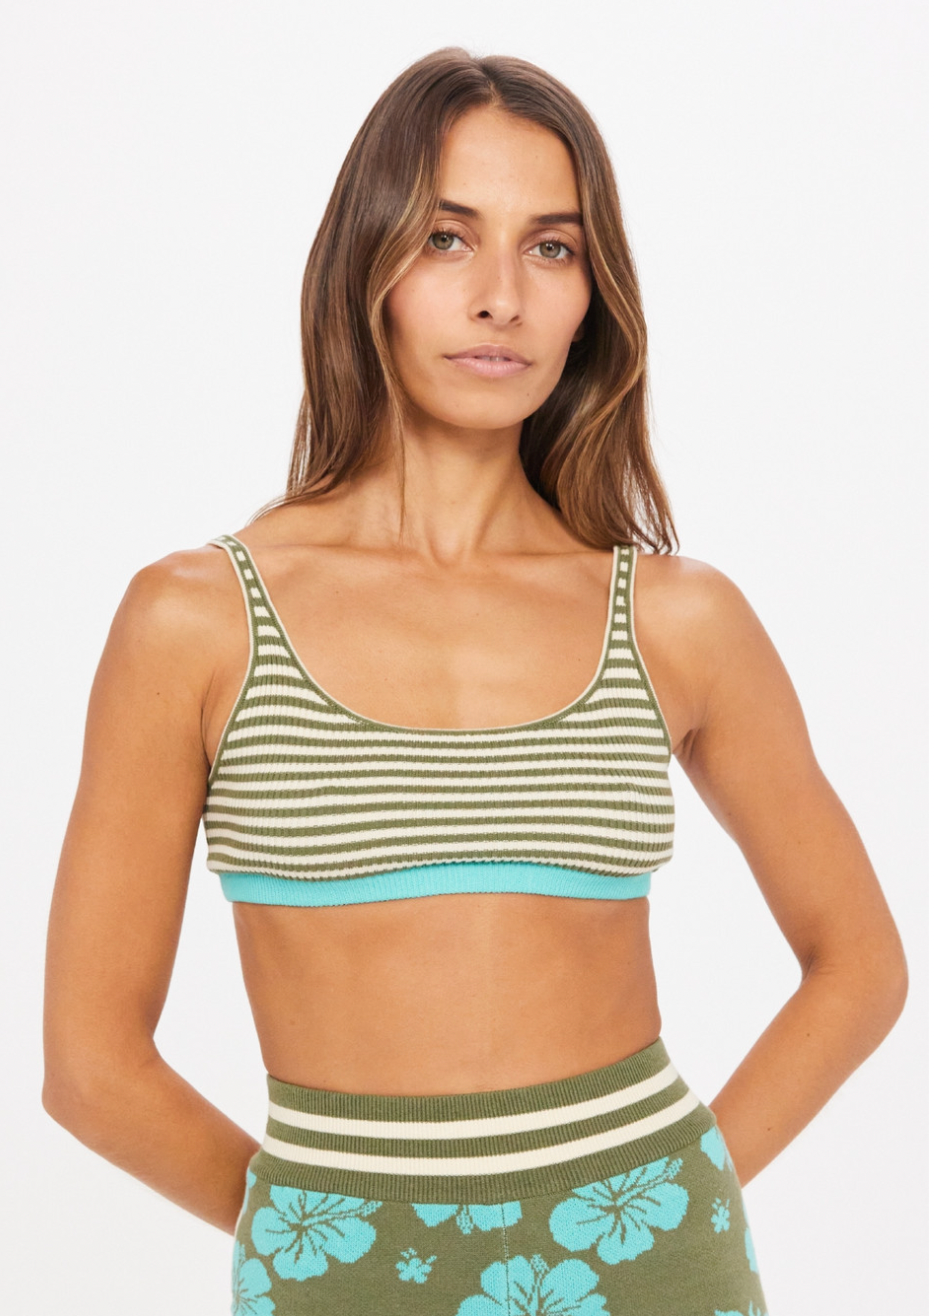 Aloha Rory Knit Bra - Pine, by The Upside Be easy, breezy, beautiful in our Aloha Knit Bra..  Organic cotton blend knitted stripe bra Straight back straps and a scooped square neck Cool colours of pine green, natural and agave